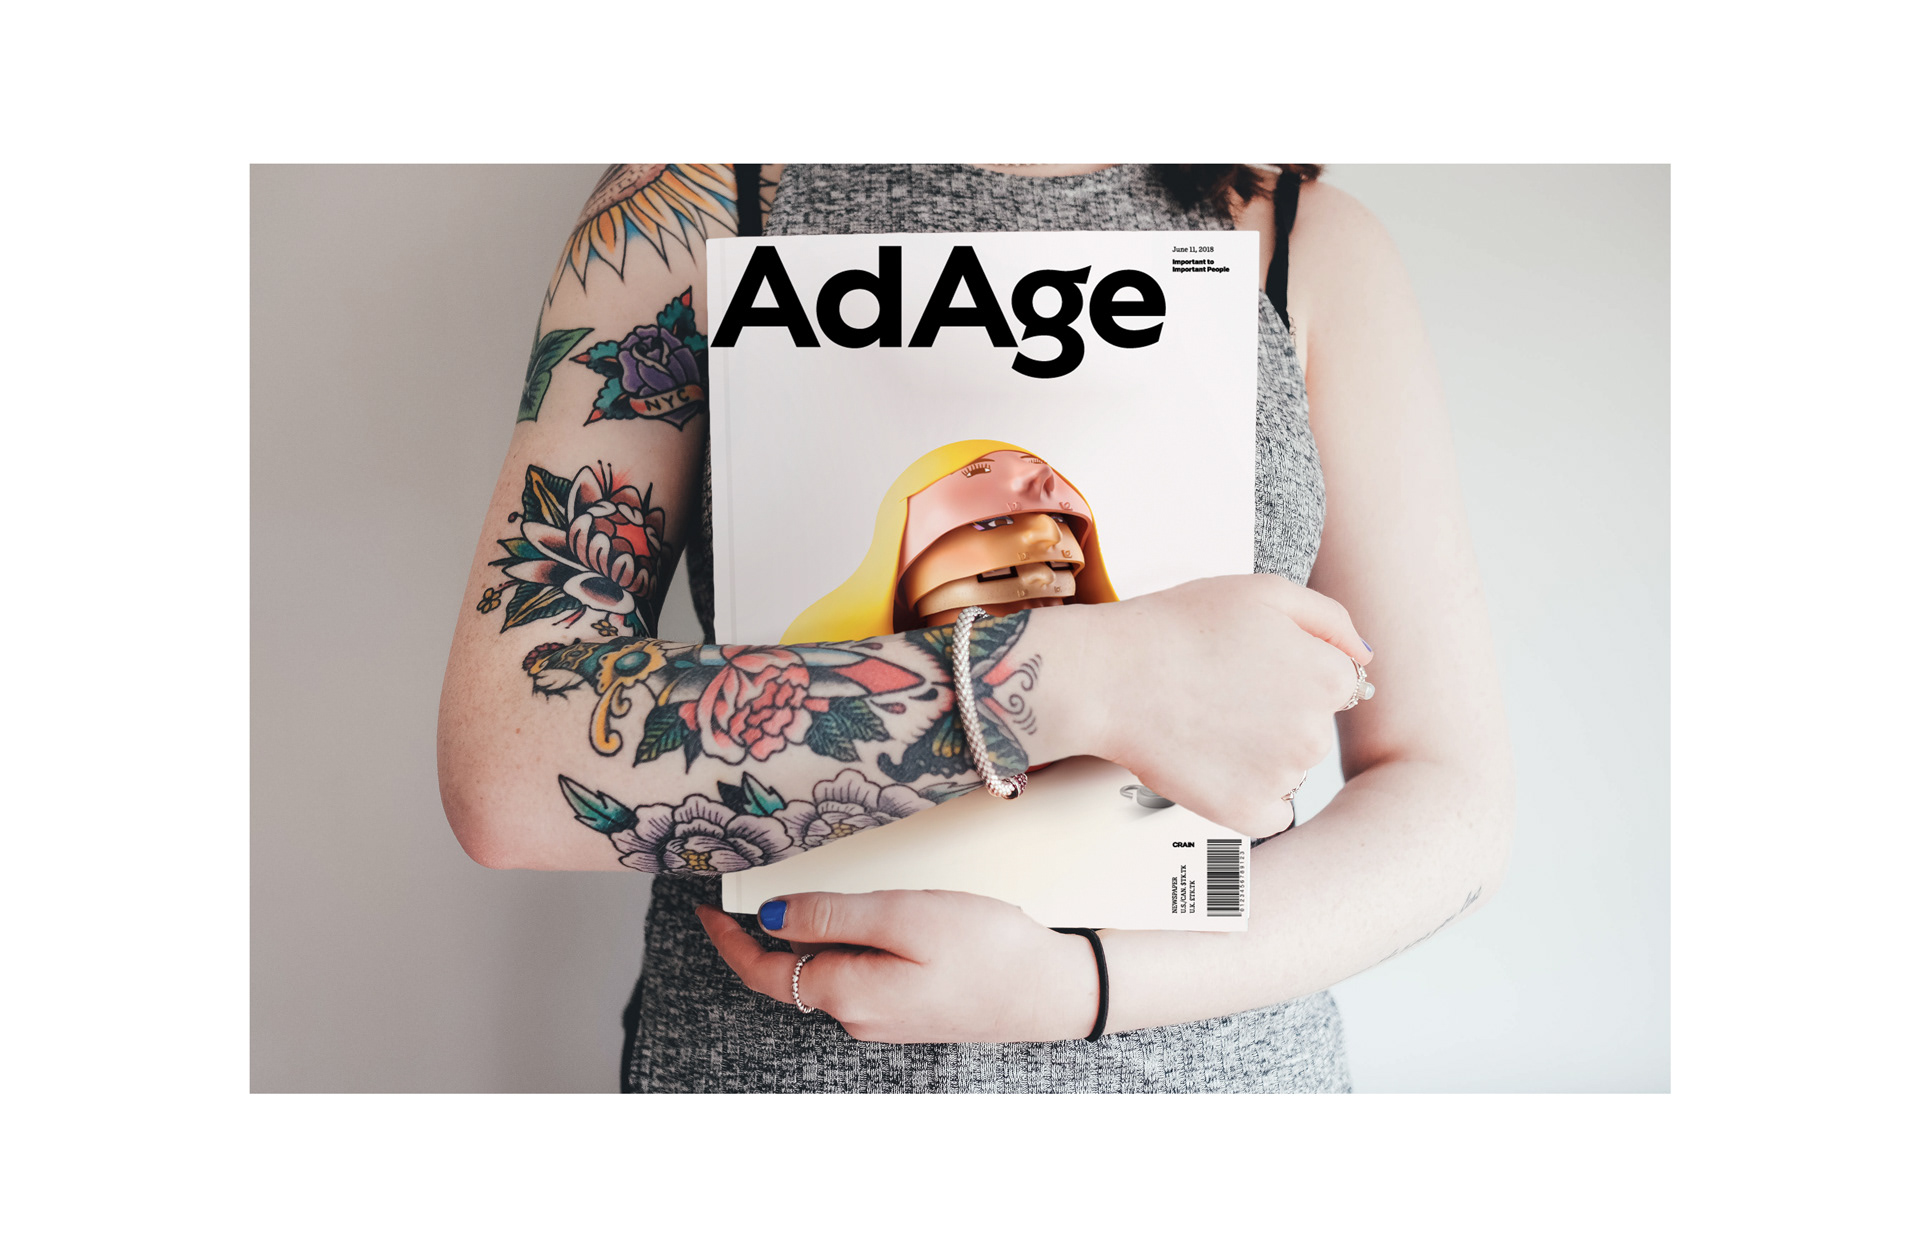 Ad Age Cover Competition on Behance52c24980865827.5ceda783927eb.jpg